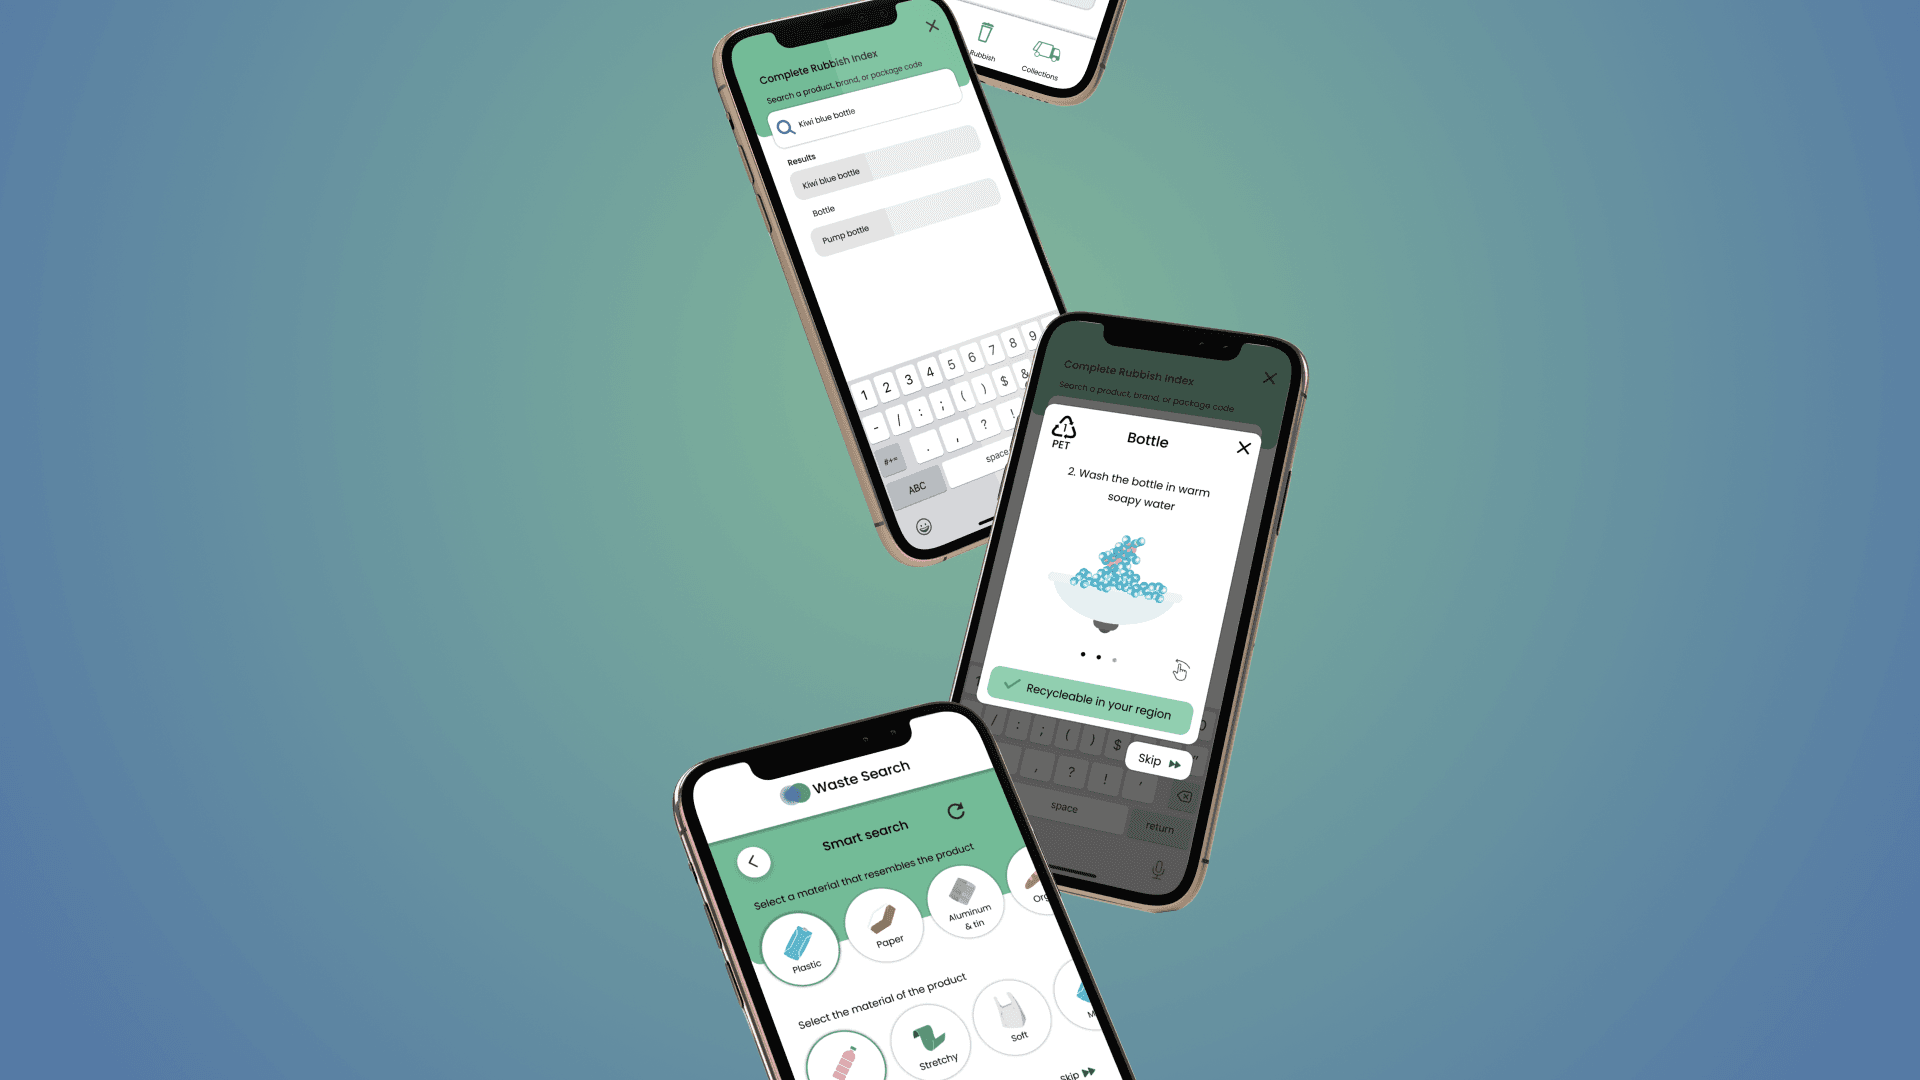 Illustration of mockups of recycling app on phone screens